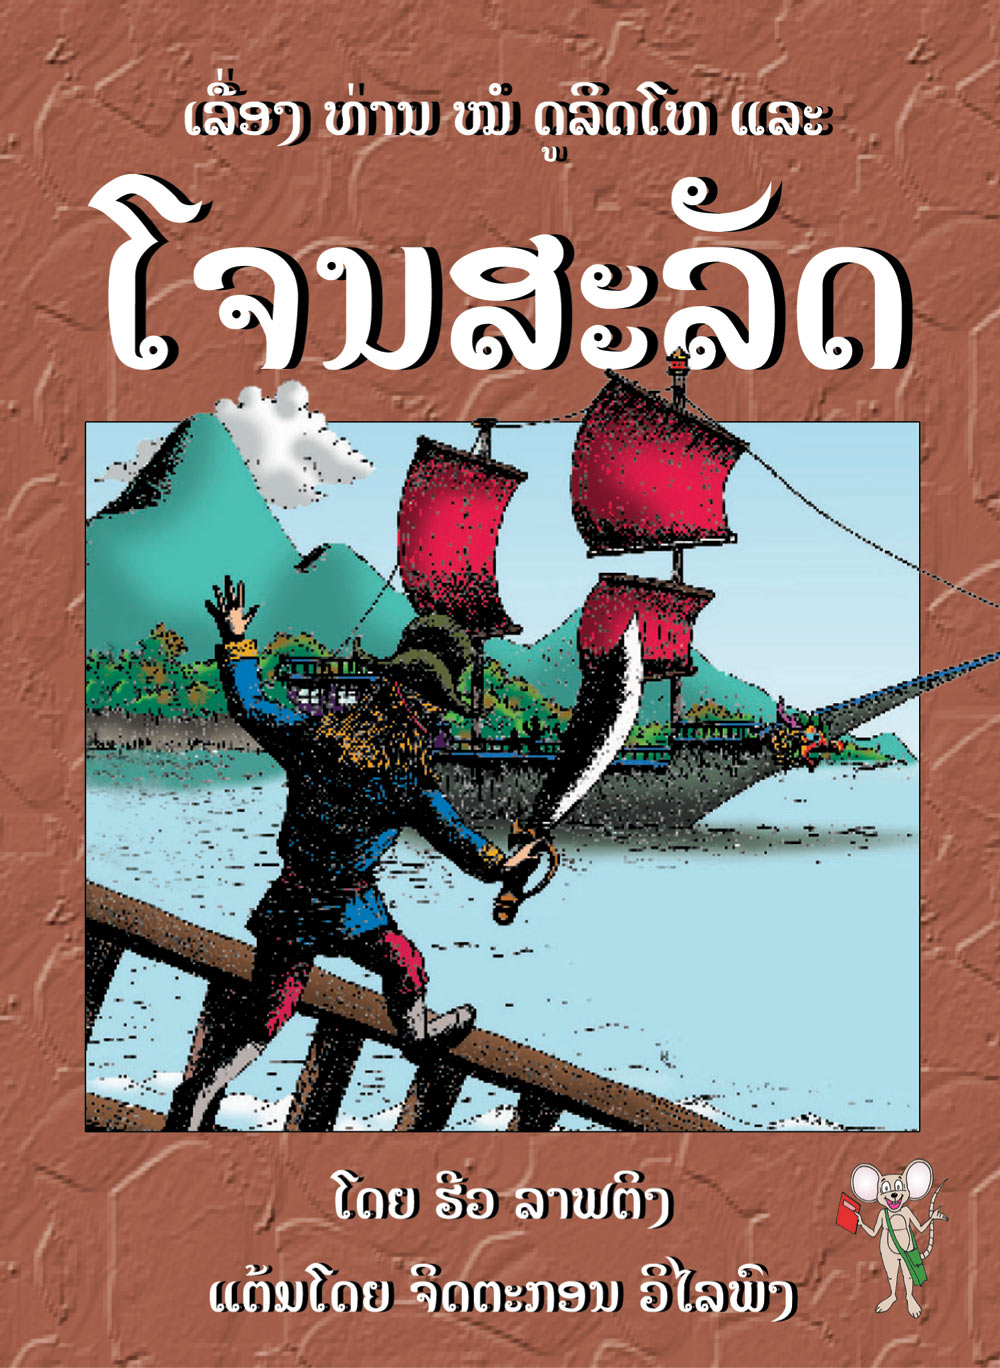 Dr. Dolittle and the Pirates large book cover, published in Lao language